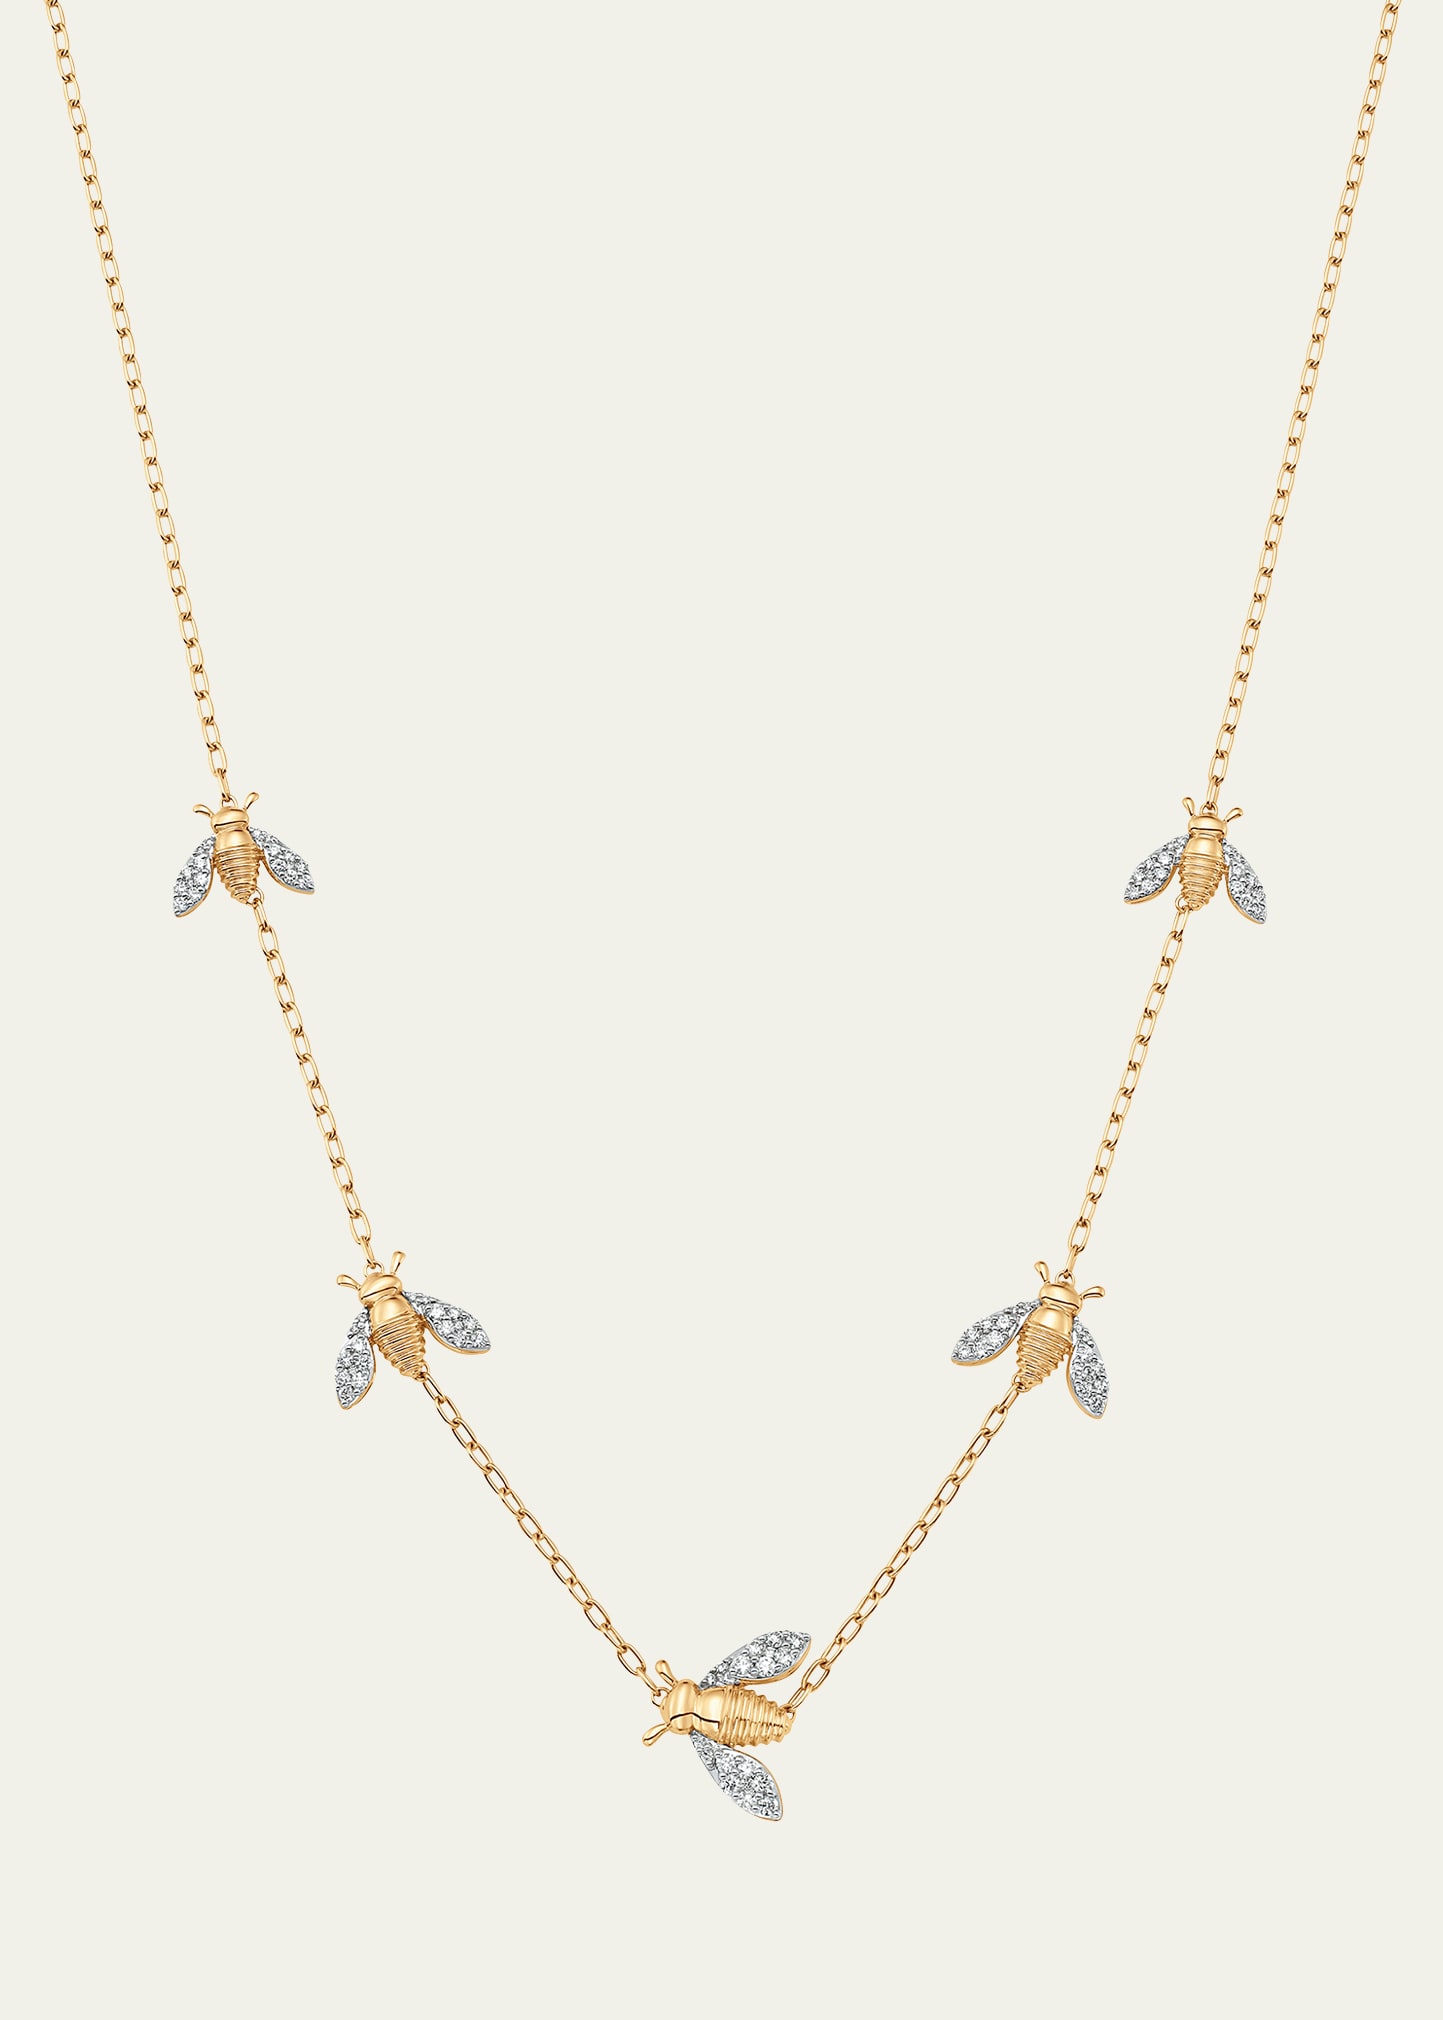 18K Two-Tone Gold Queen Bee Petite Diamond 5-Station Necklace